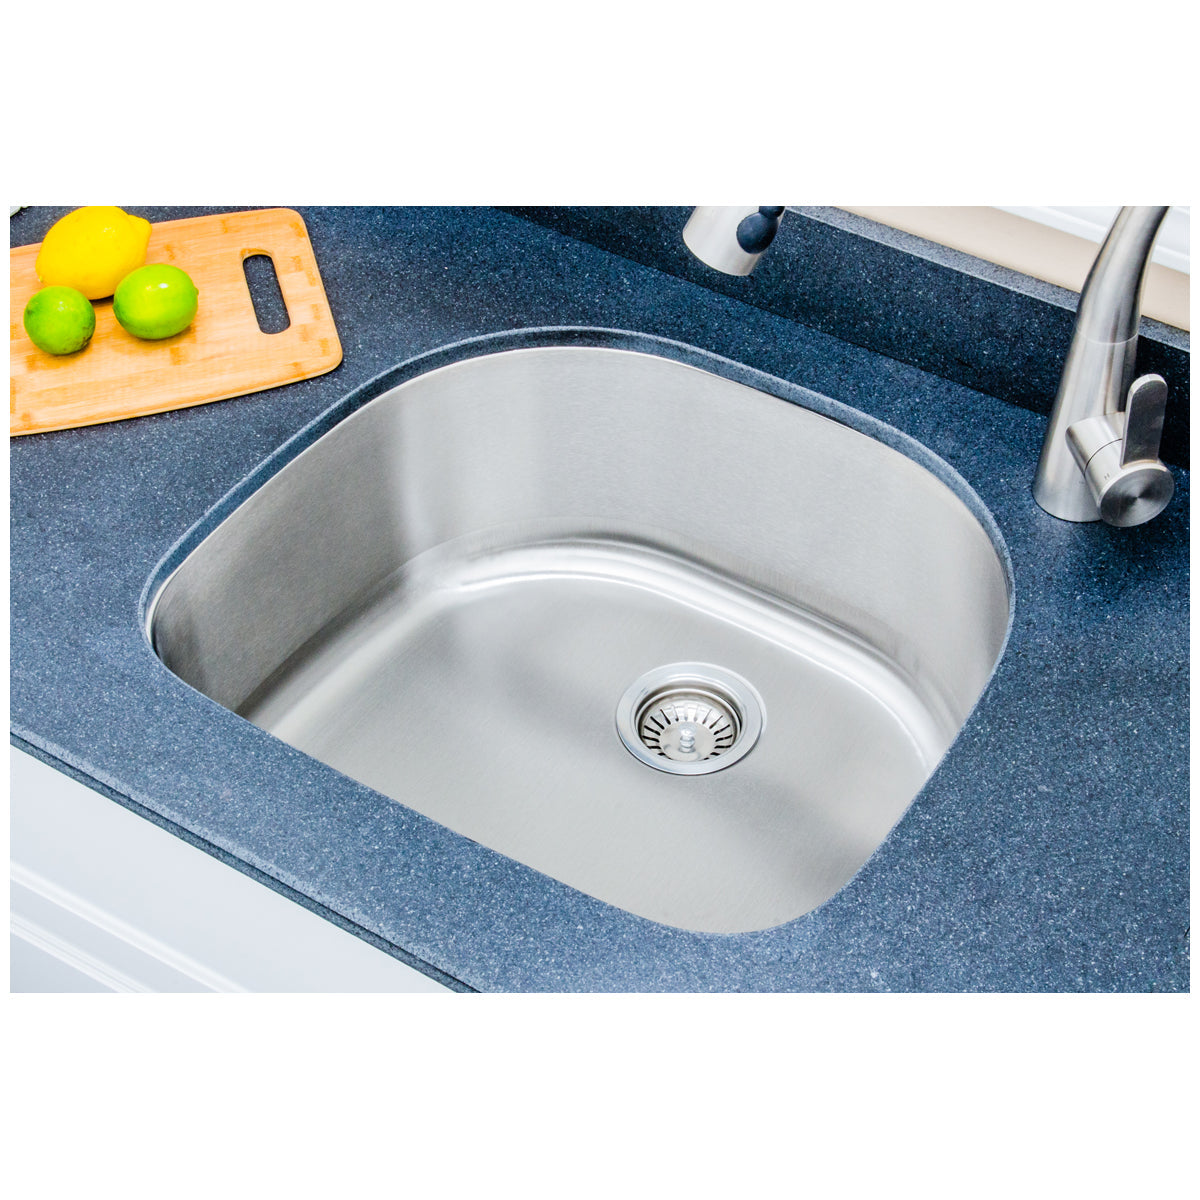 Wells Sinkware 24" 18-Gauge Undermount D-shaped Single Bowl Stainless Steel Kitchen Sink with Grid Rack and Basket Strainer